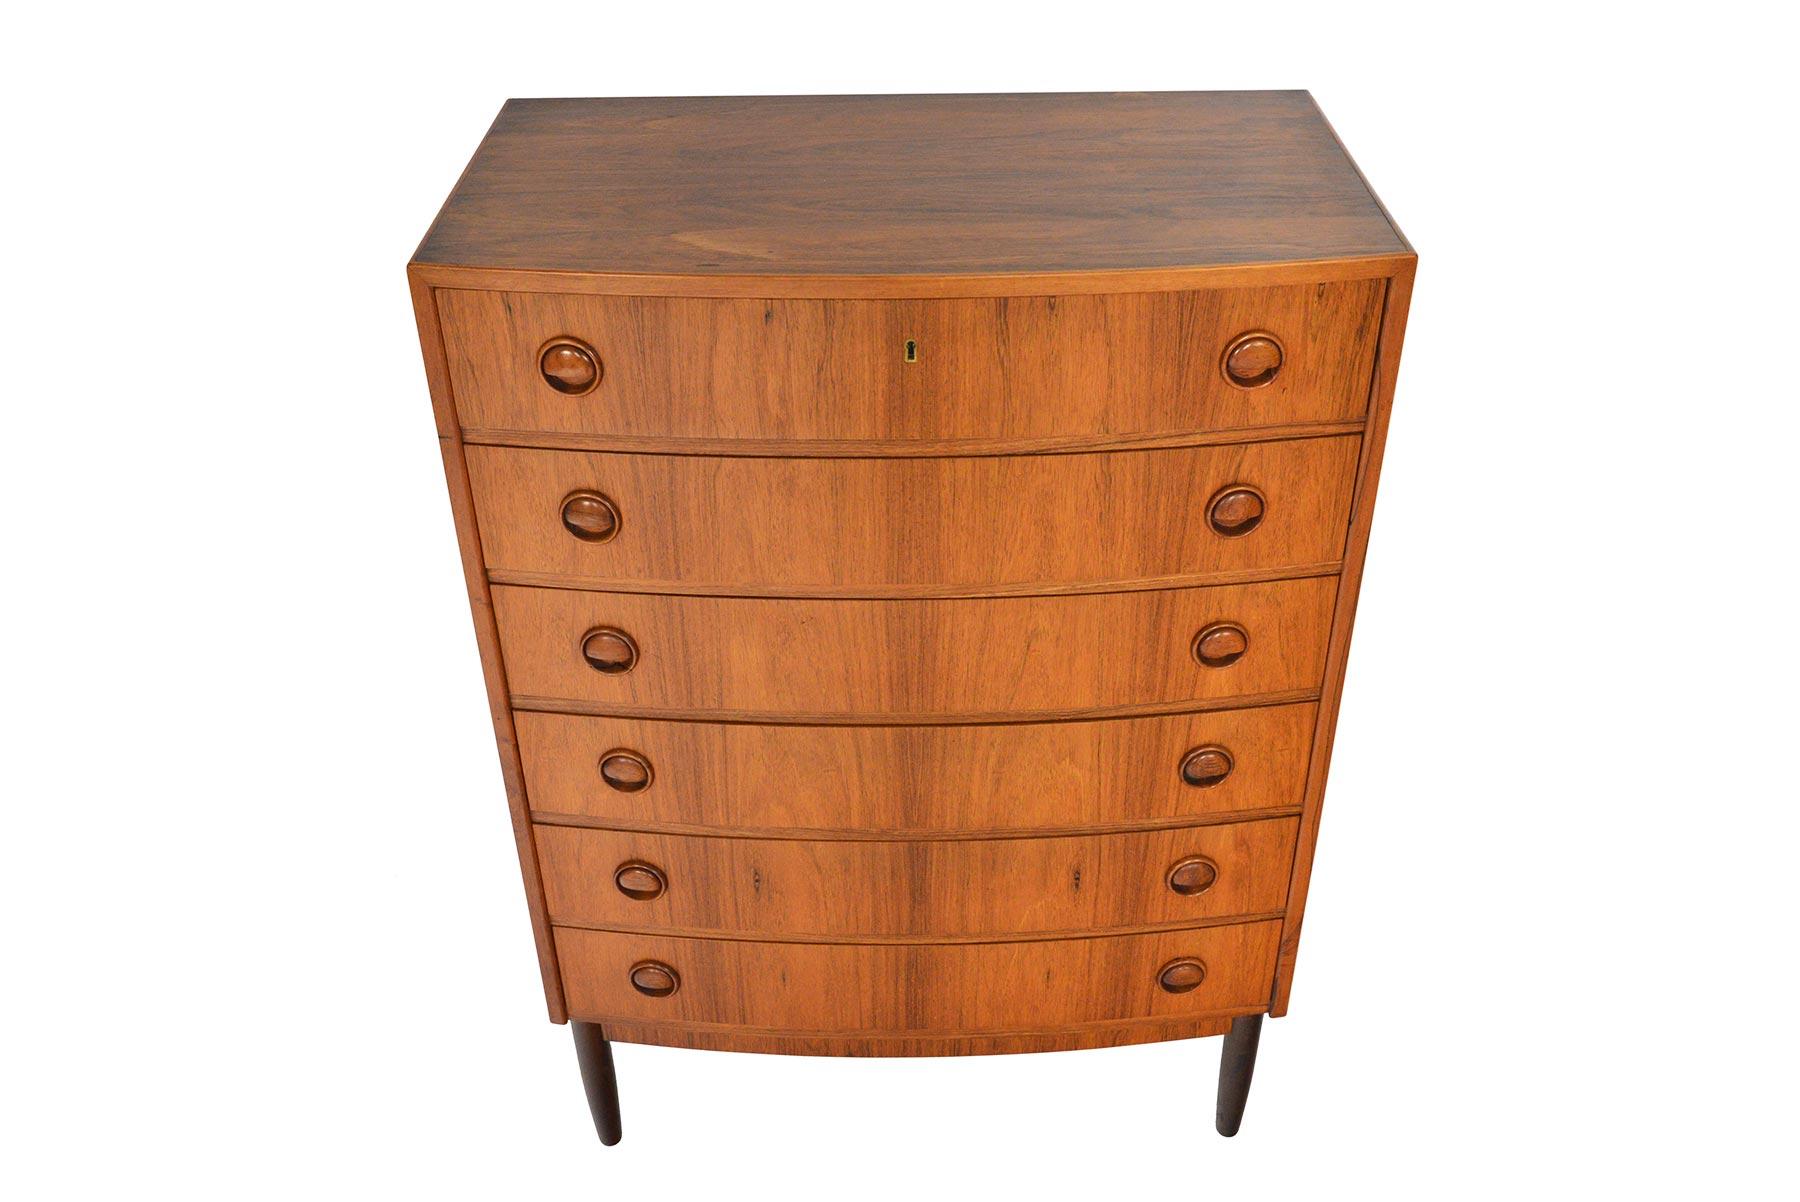 Beautifully bowed, this Danish modern highboy dresser was designed by Kai Kristiansen in the 1960s. Crafted in Brazilian rosewood, this piece offers exceptional joinery and distinguished carved round drawer pulls. In excellent original condition.
  